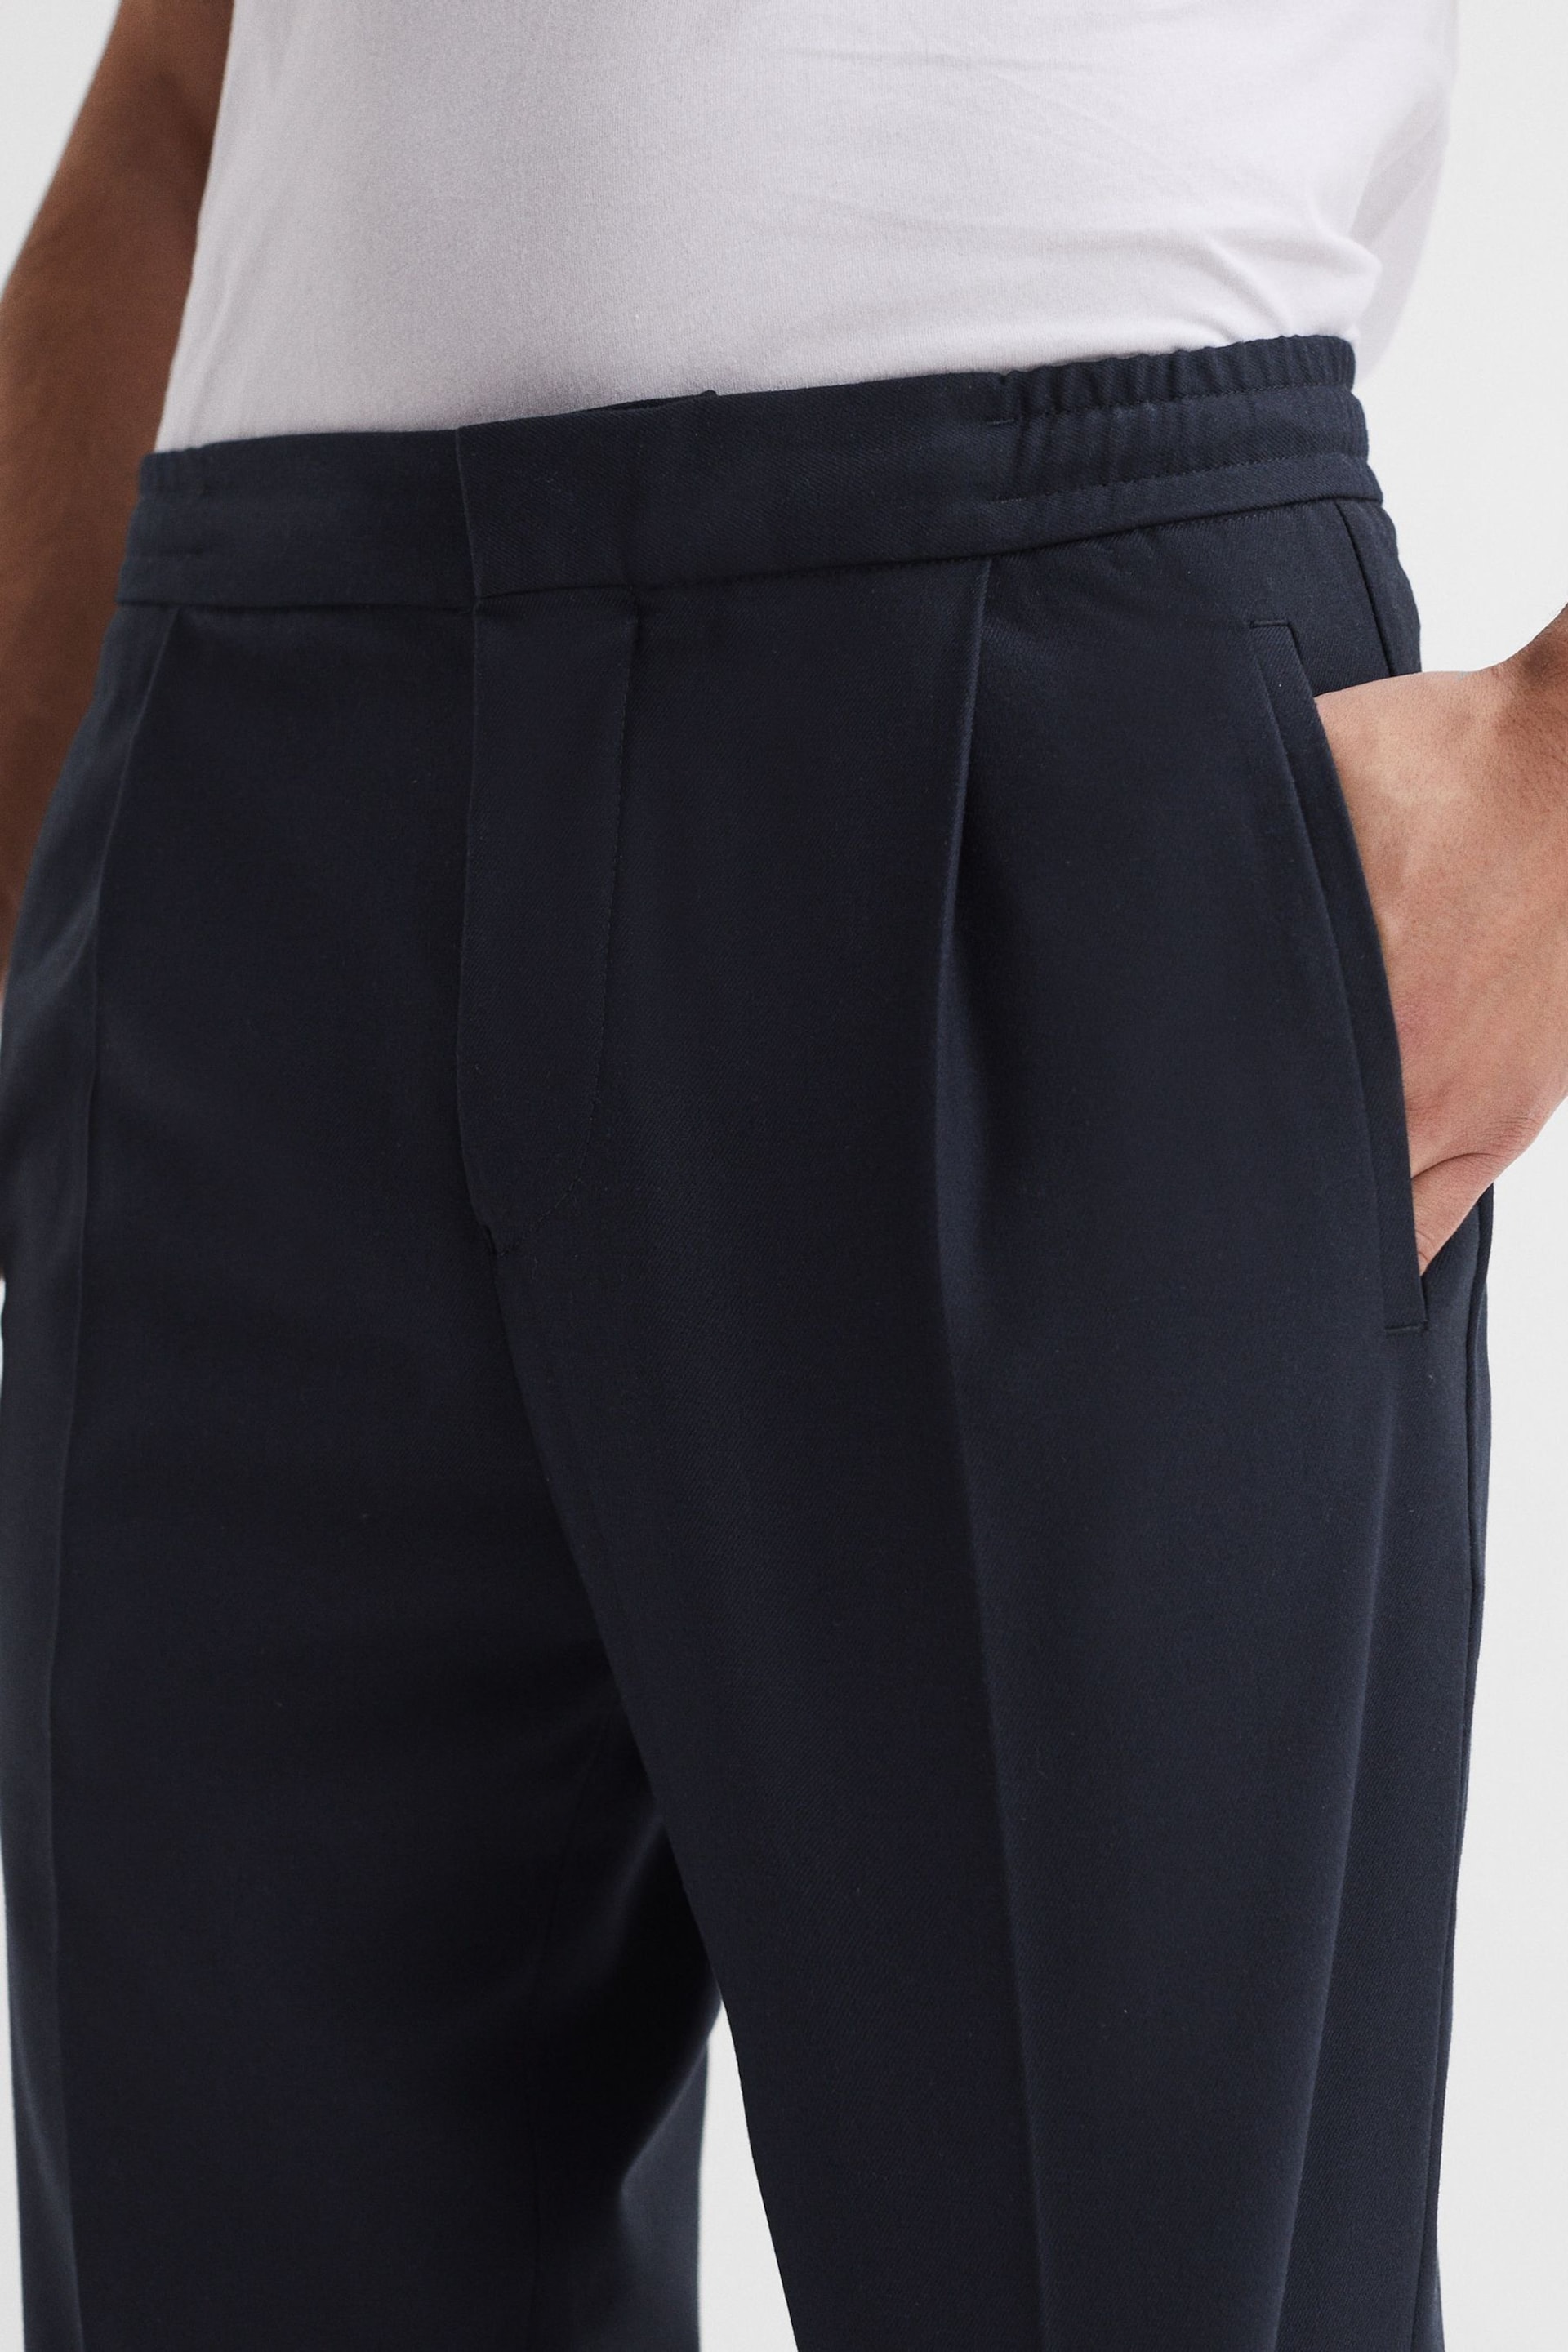 Reiss Navy Brighton Relaxed Drawstring Trousers with Turn-Ups - Image 4 of 5